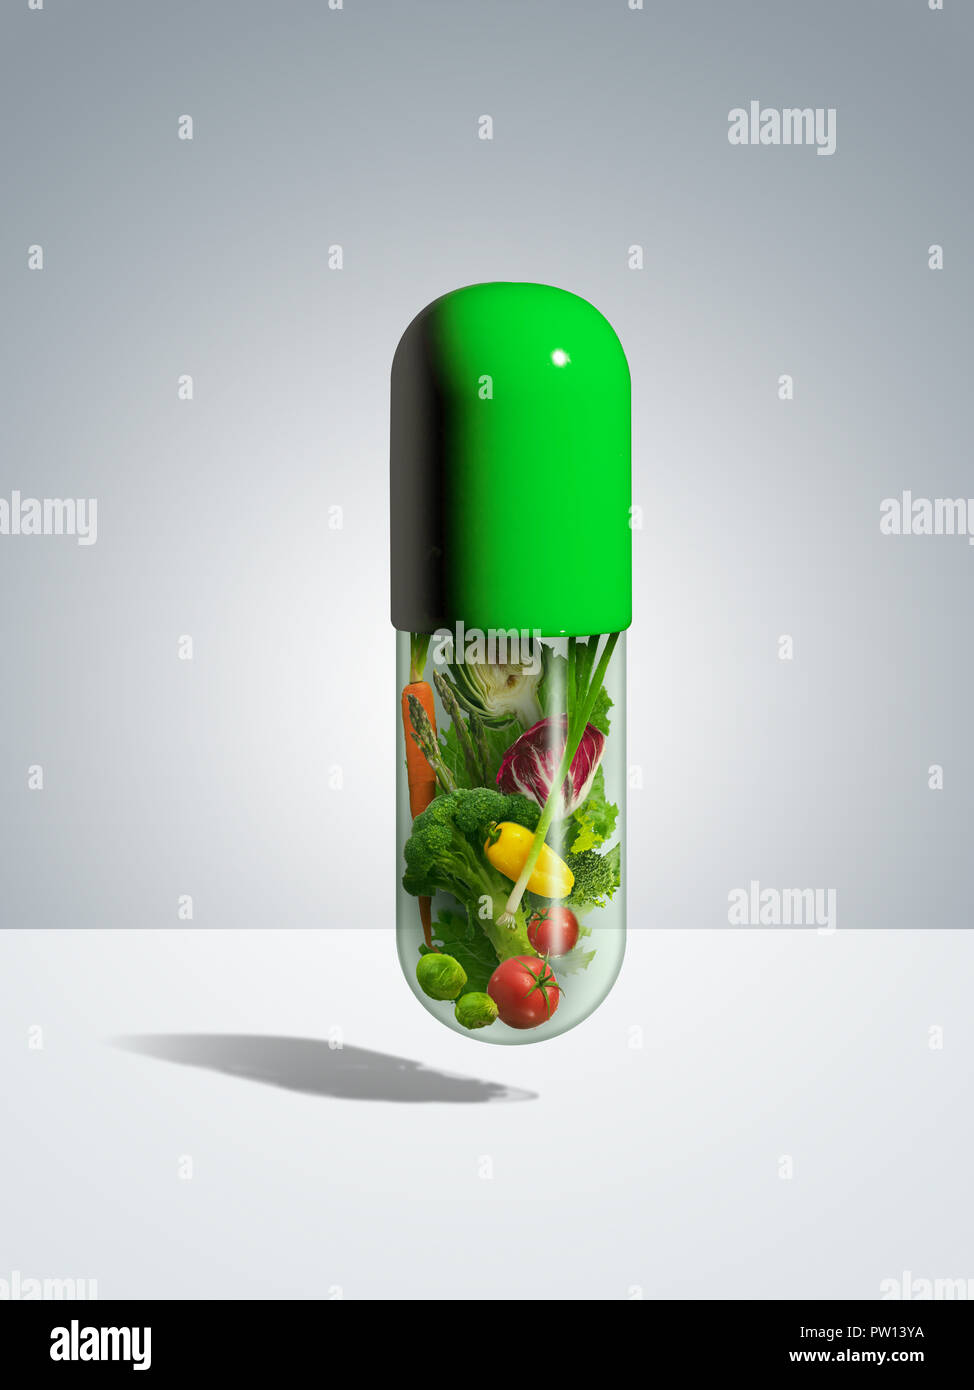 Concept A Green Pill Filled with Vegetables, Healthy Eating, Nutritional, Eat your Vegetable, Prescription Diet, Food Group Stock Photo